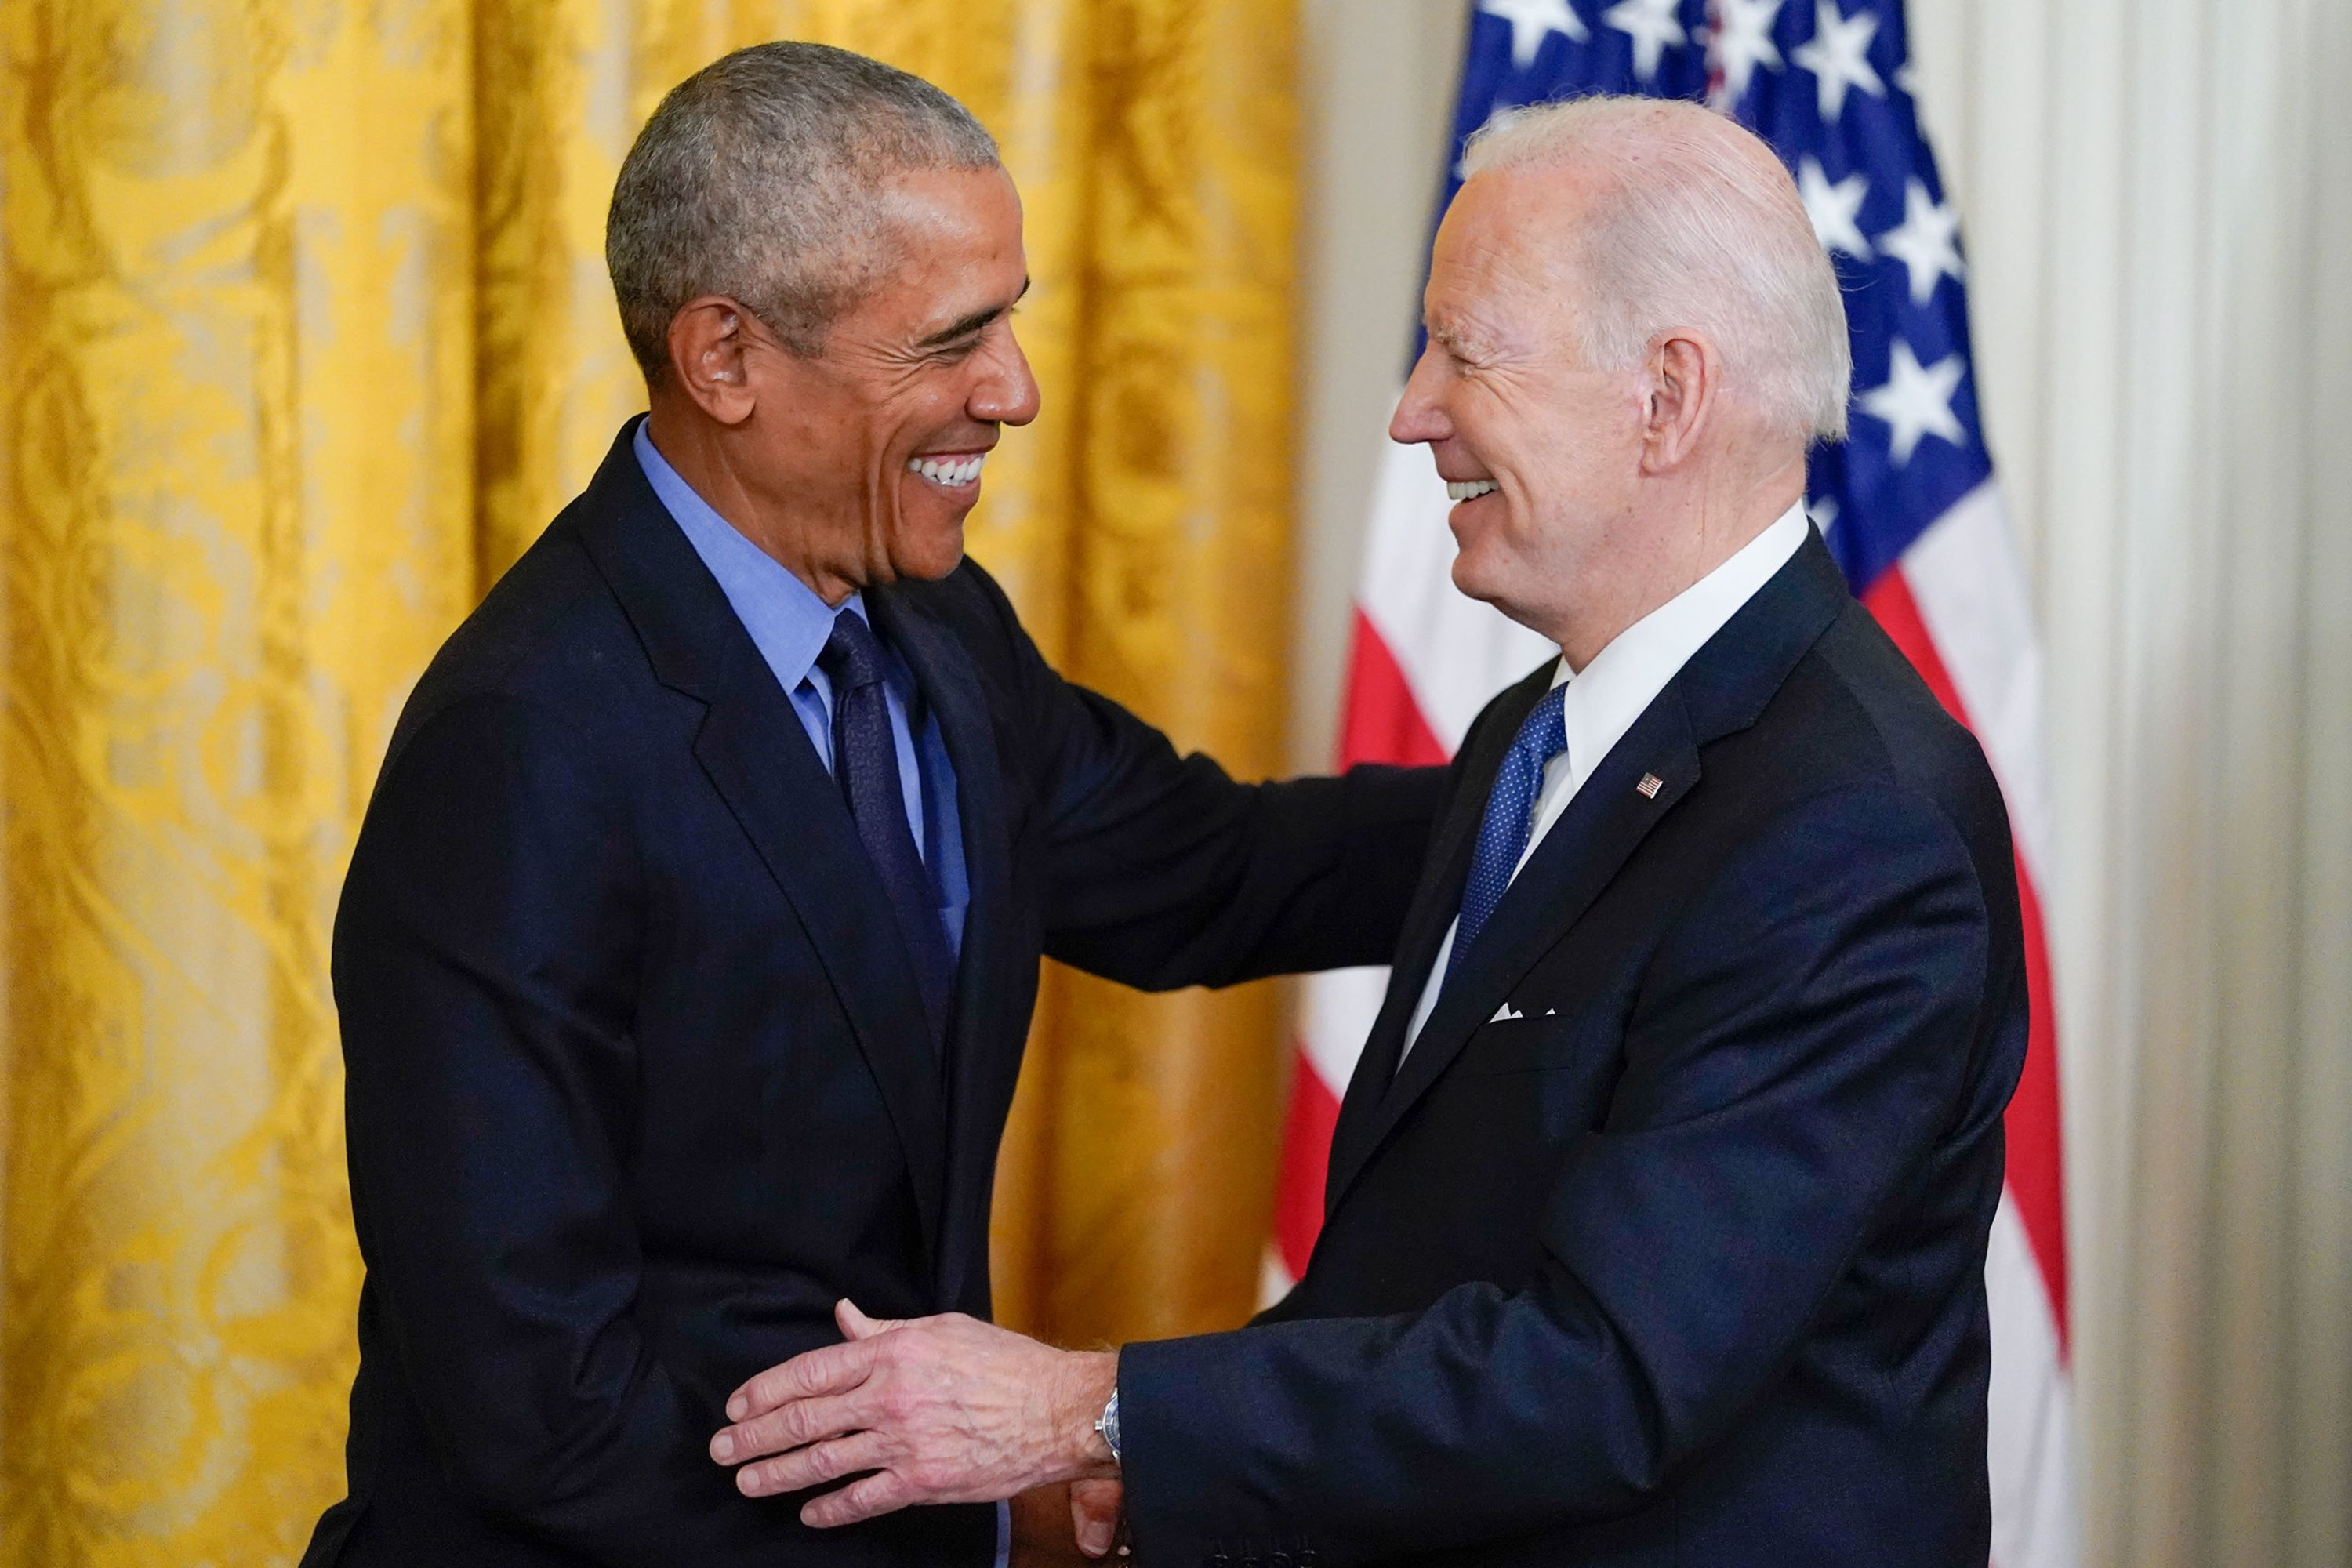 Former President Barack Obama shakes hands with President Joe Biden in the East Room of the White House on Tuesday, April 5